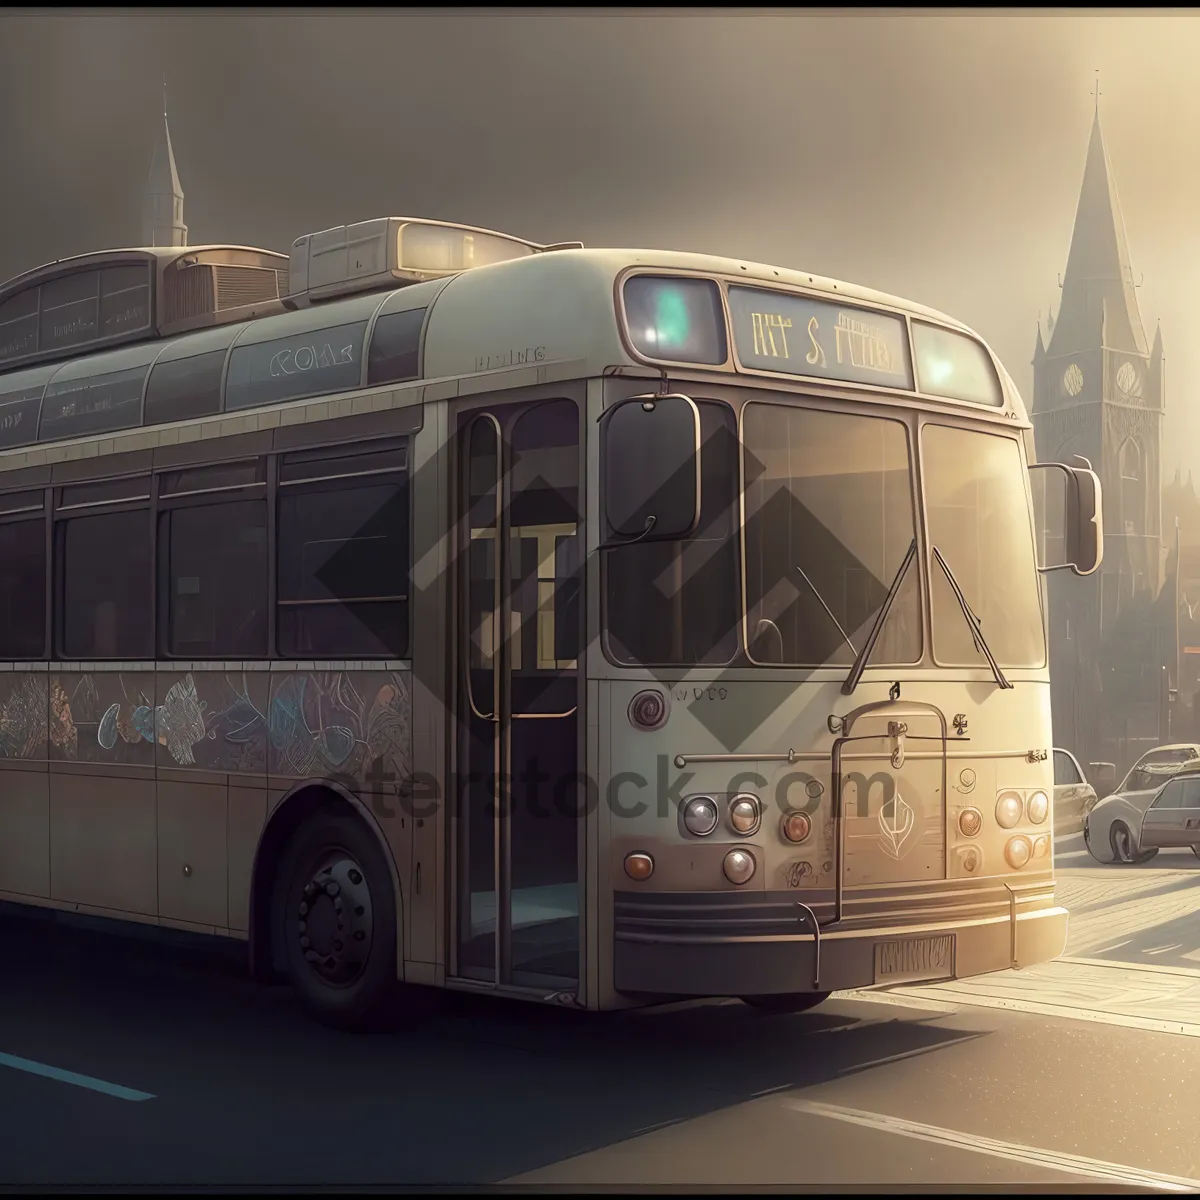 Picture of Urban Trolleybus - Efficient Public Transportation on City Streets